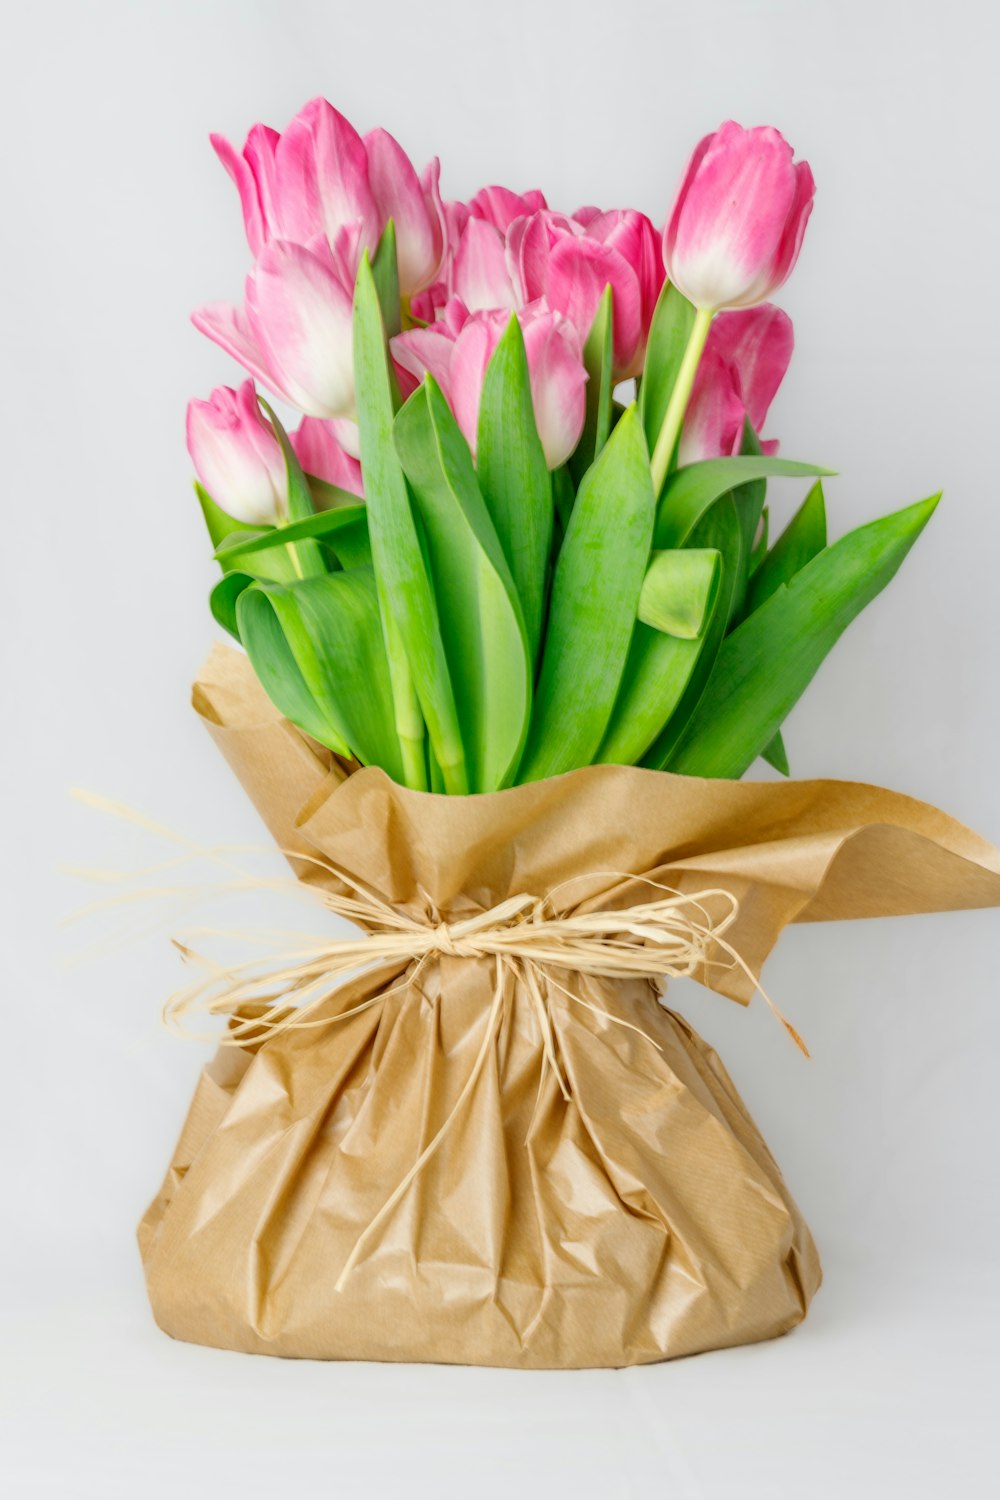 a bouquet of pink and white tulips in a brown paper bag